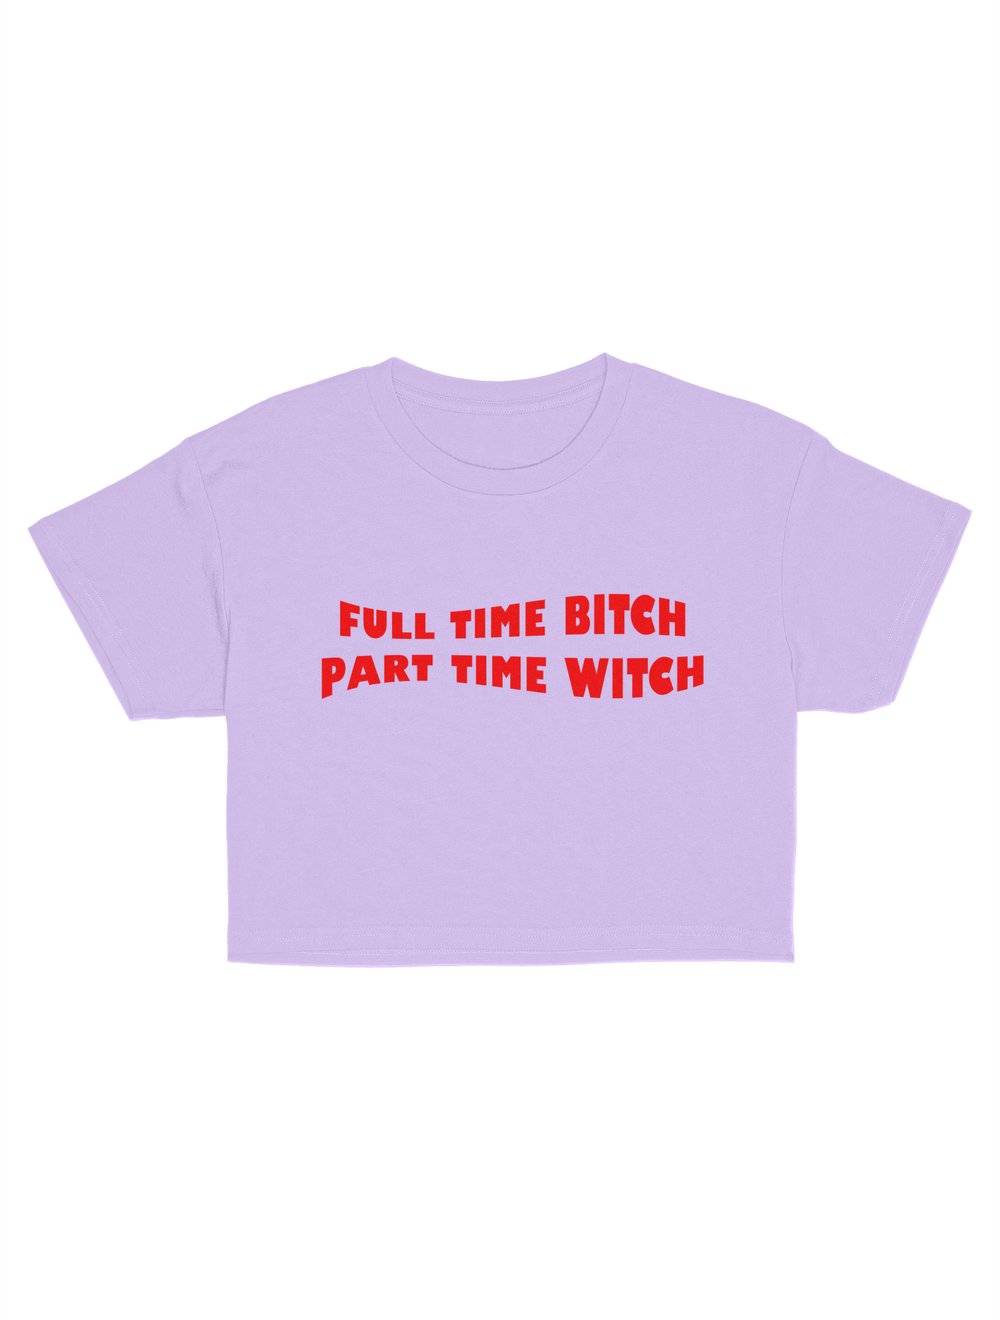 Full Time Bitch Part Time Witch Crop Top